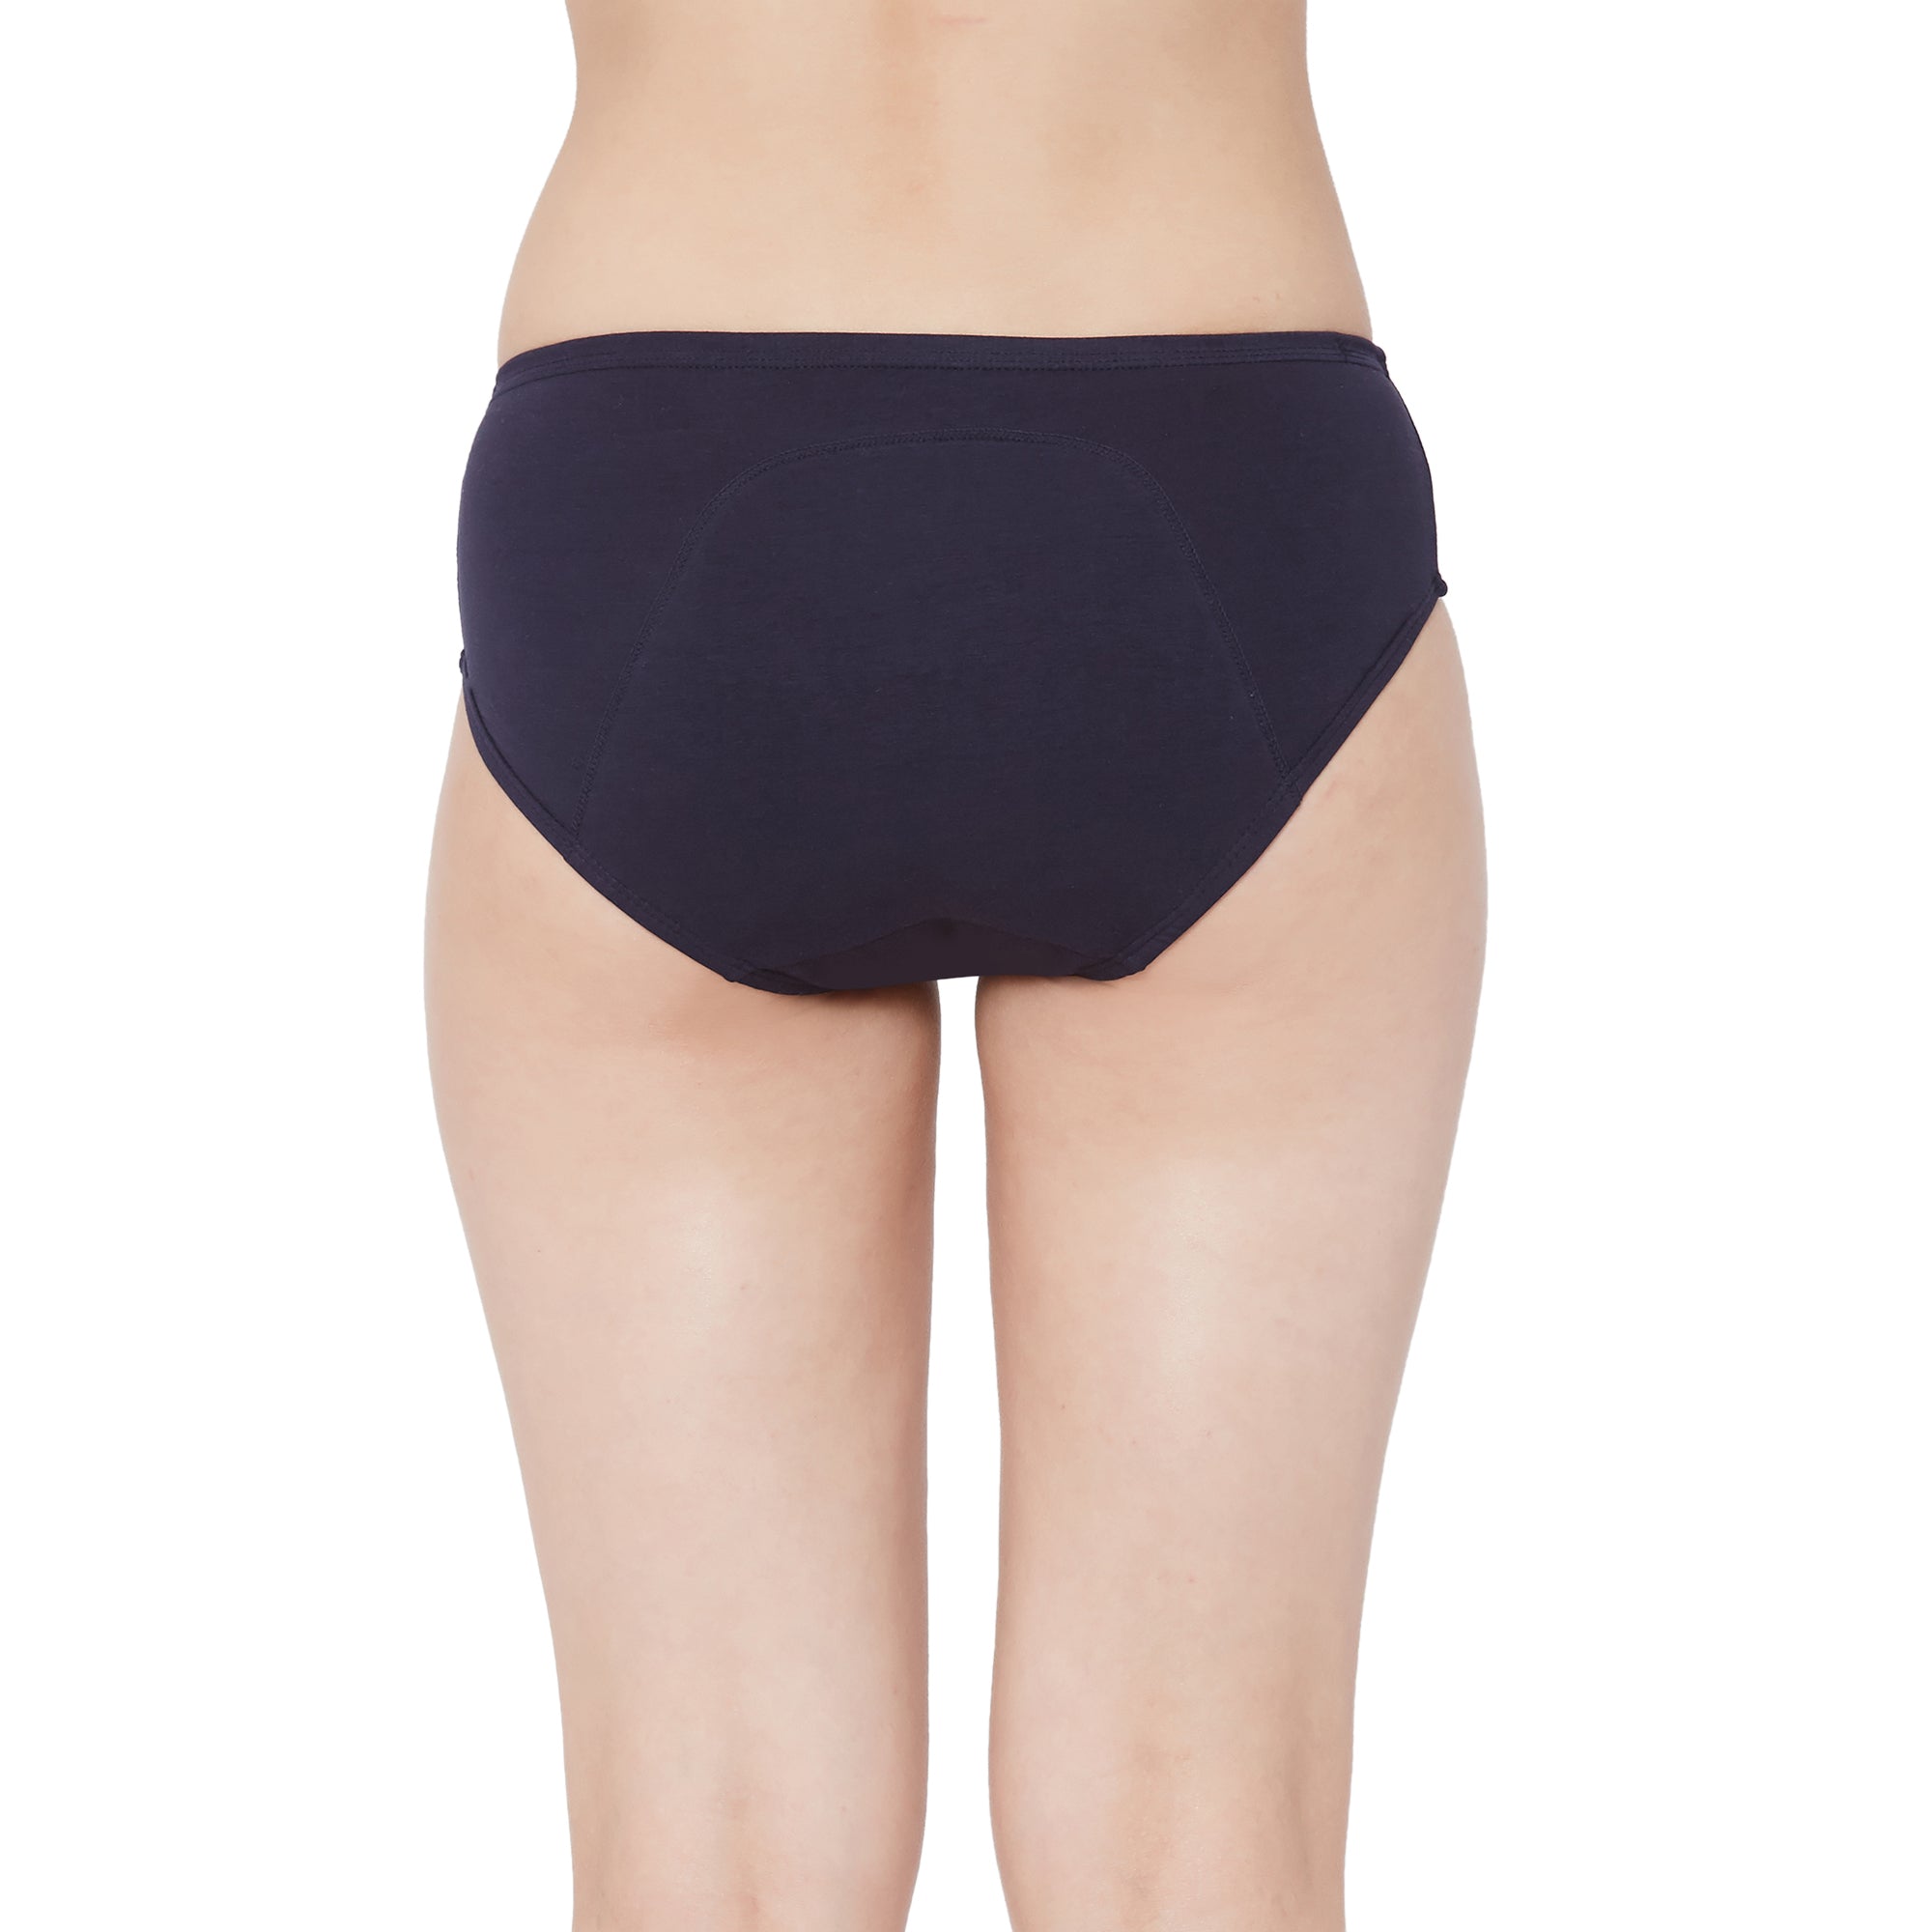 Period Panty Mid Rise No Stain Navy blue – Juliet India